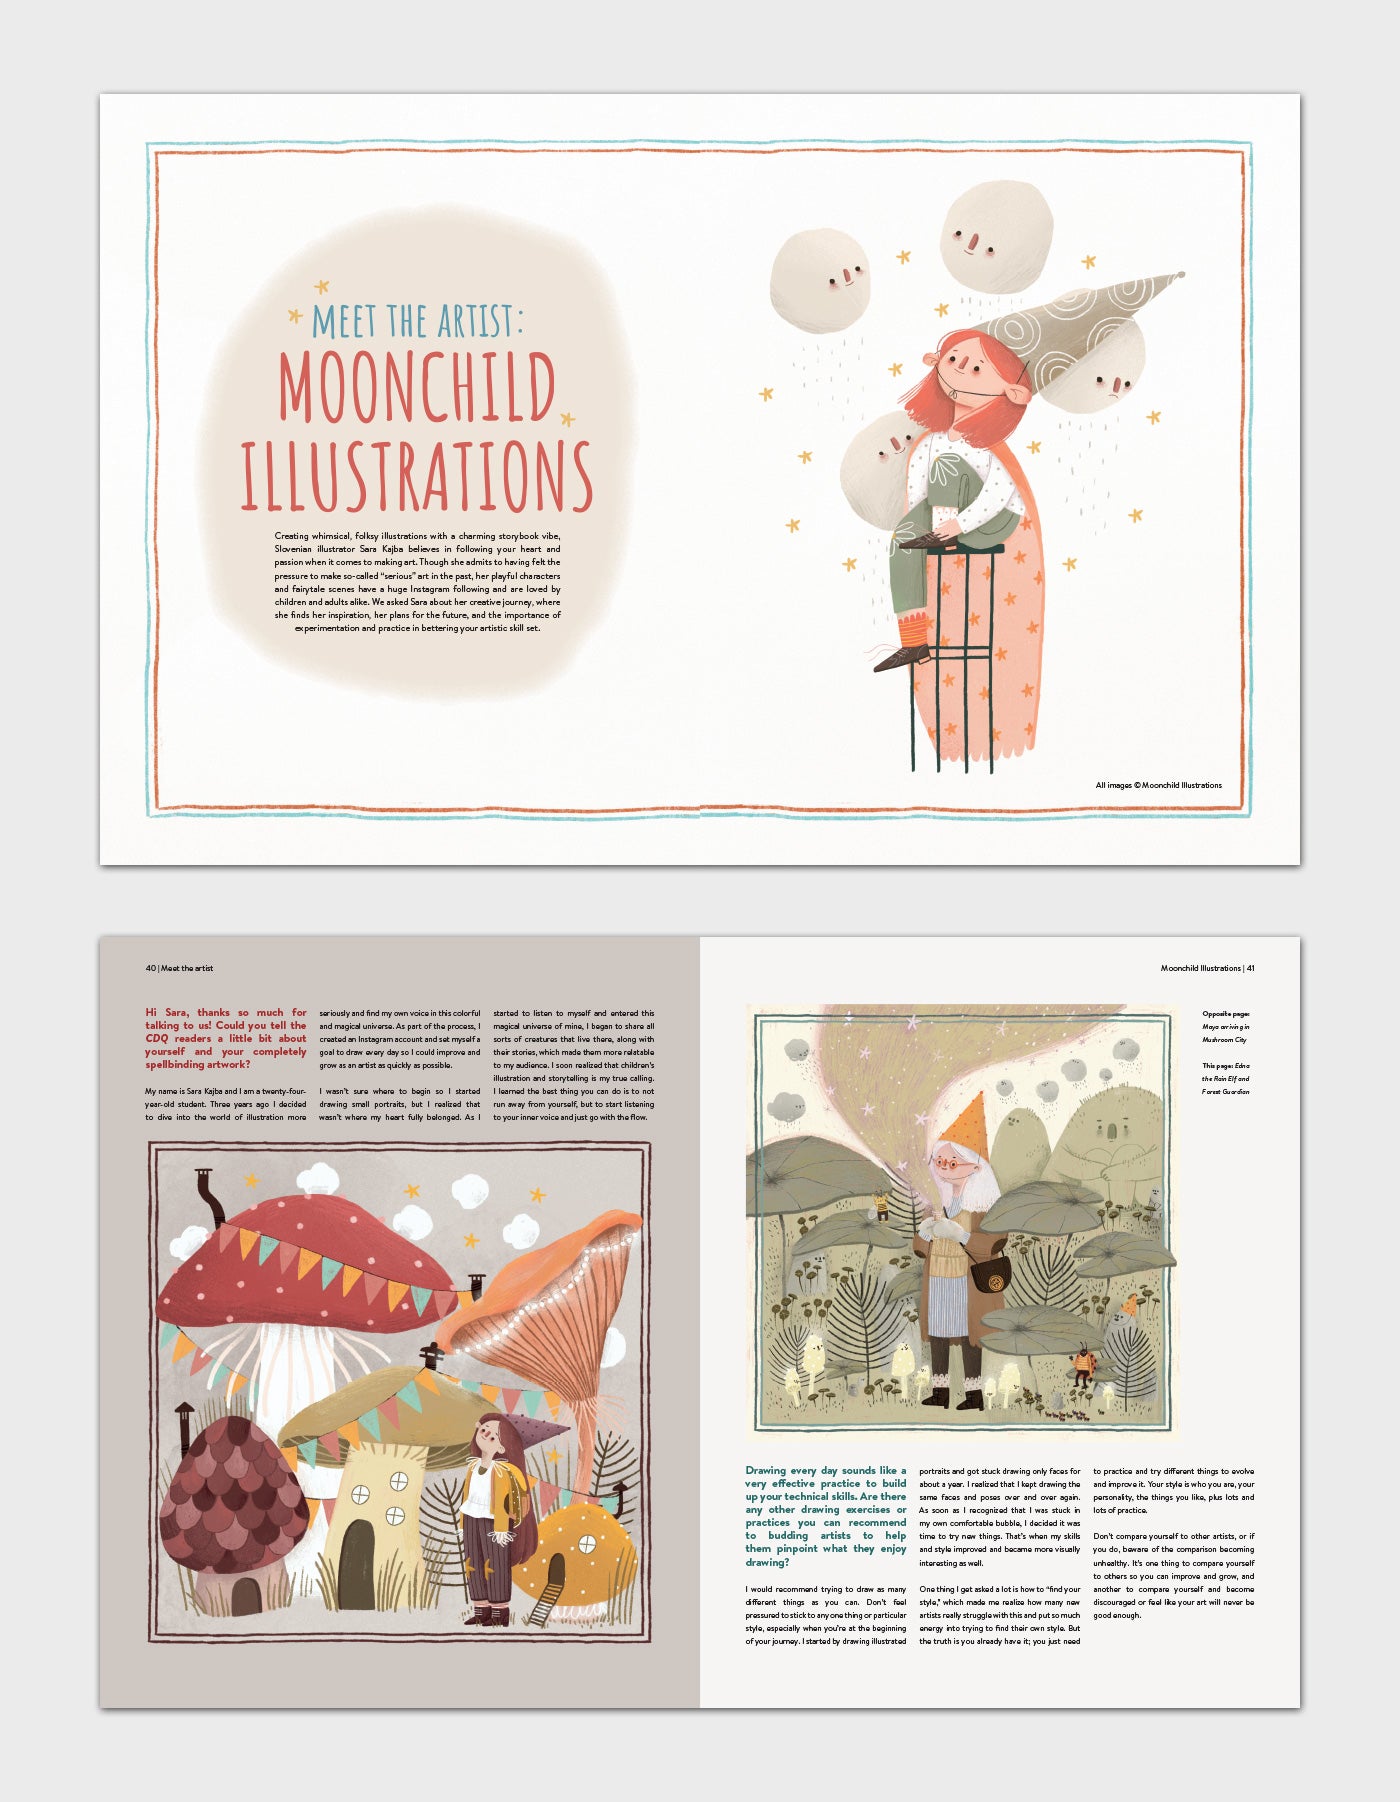 Character Design Quarterly issue 12 (Downloadable Edition)